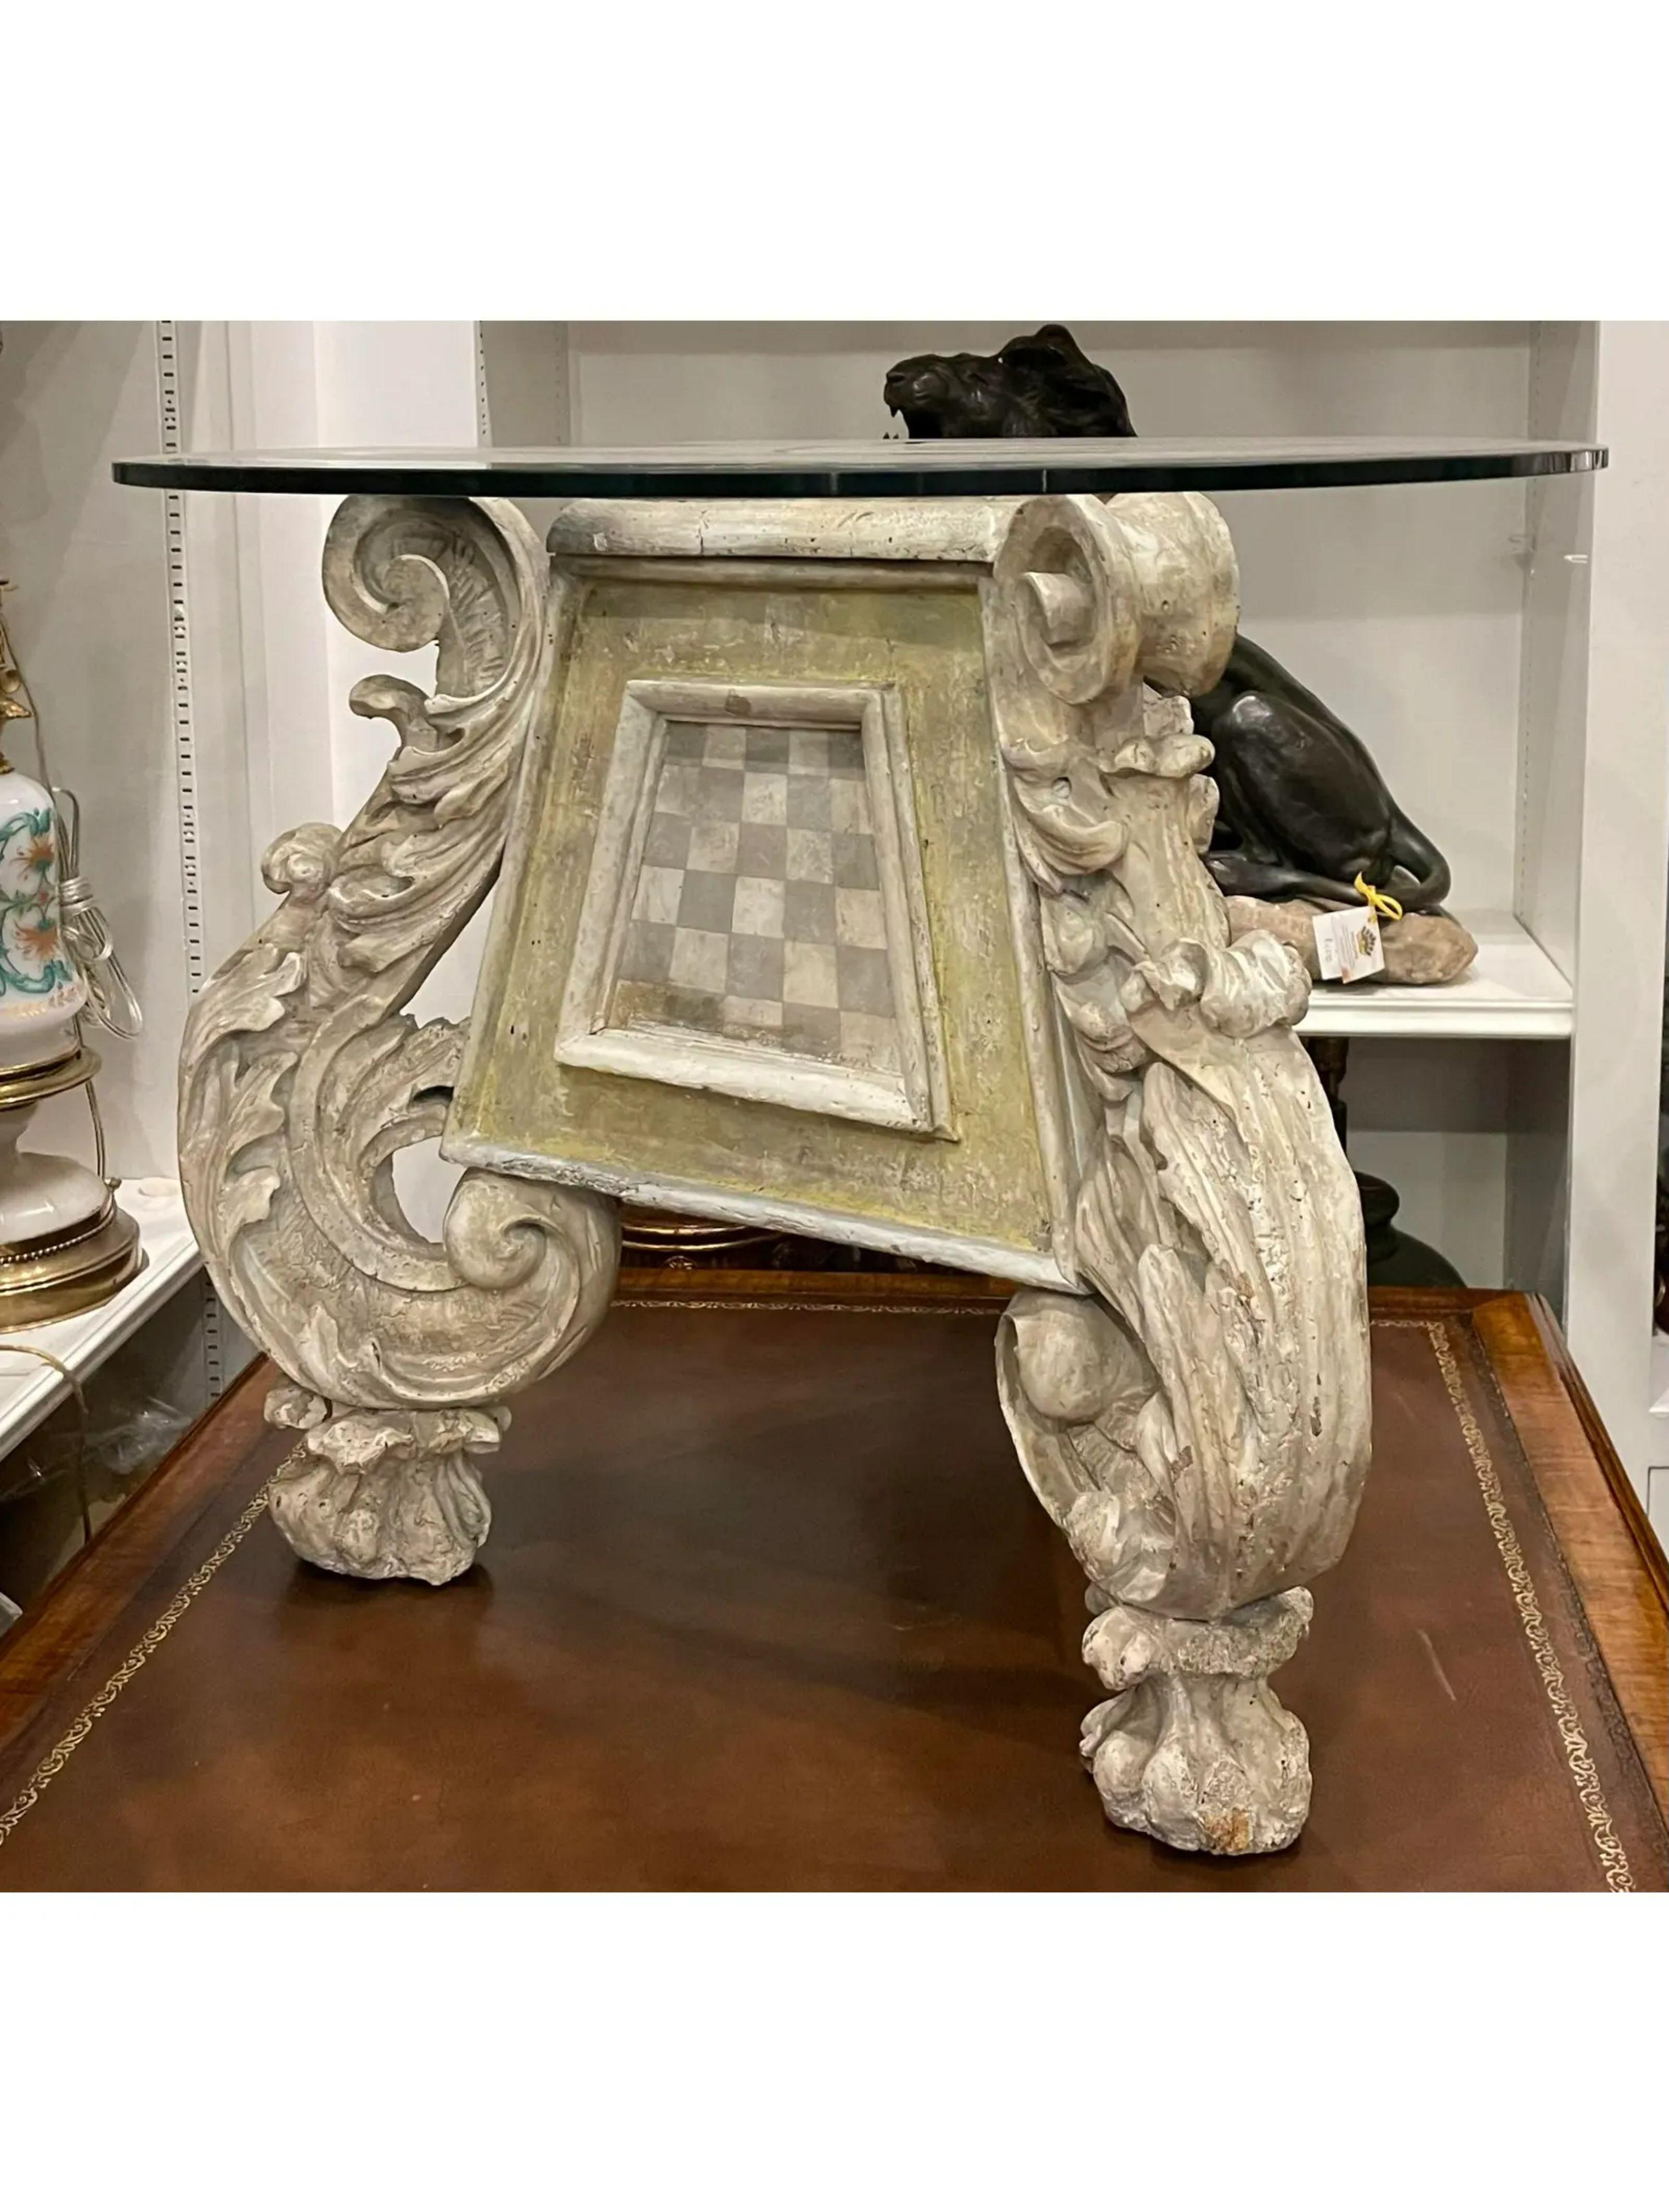 Antique early 18th century Louis XIV style triangular side table. Each side is painted in different checkered colors.

Additional information: 
Materials: Paint
Color: Light gray
Period: 18th century
Styles: Louis XIV
Table shape: Other